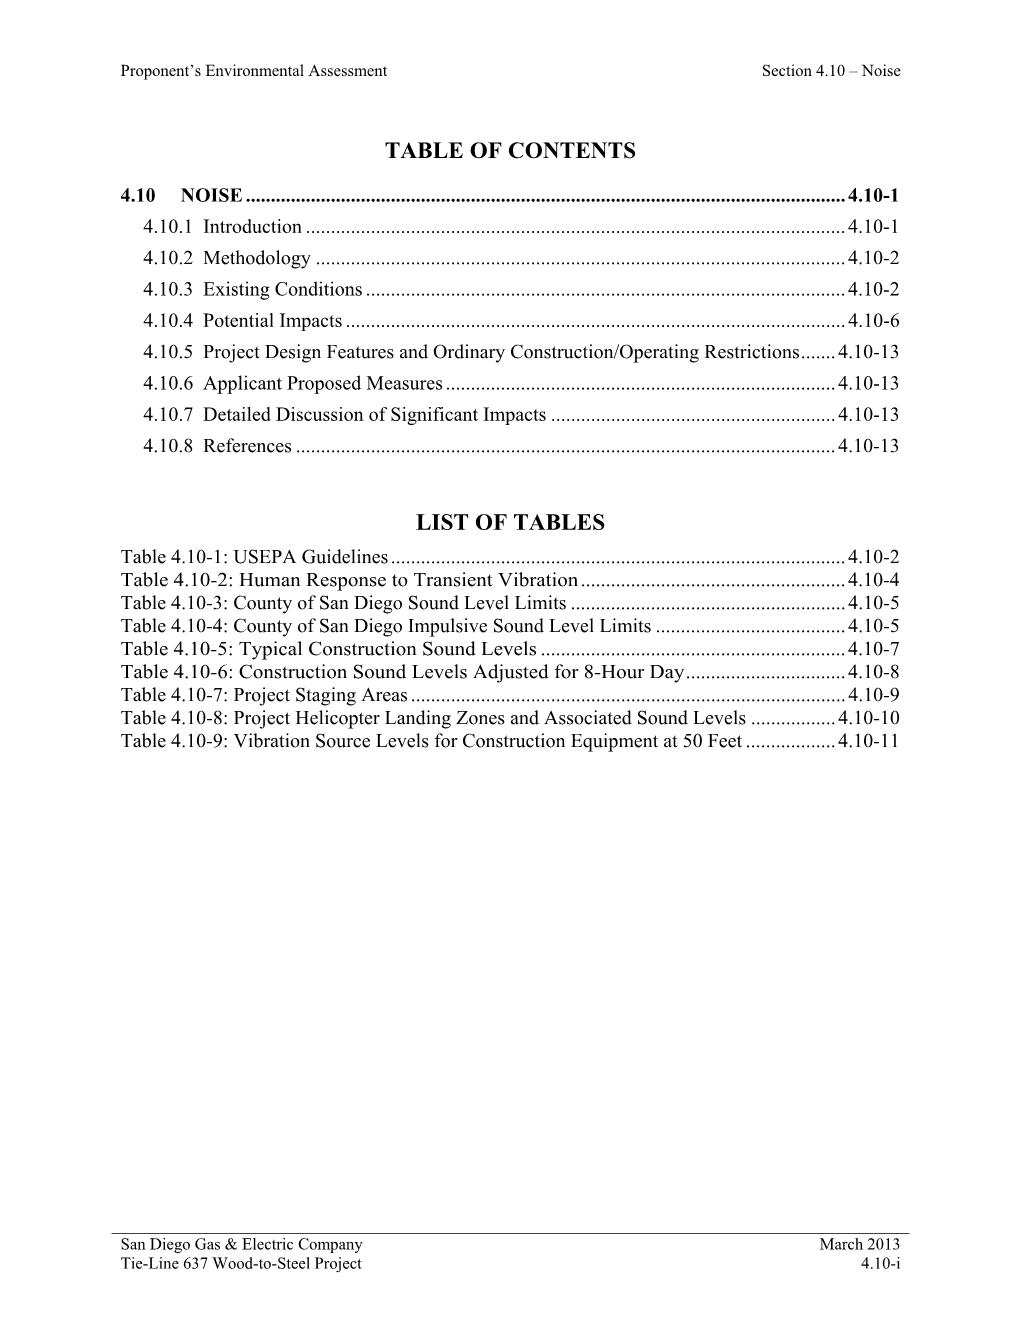 Table of Contents List of Tables